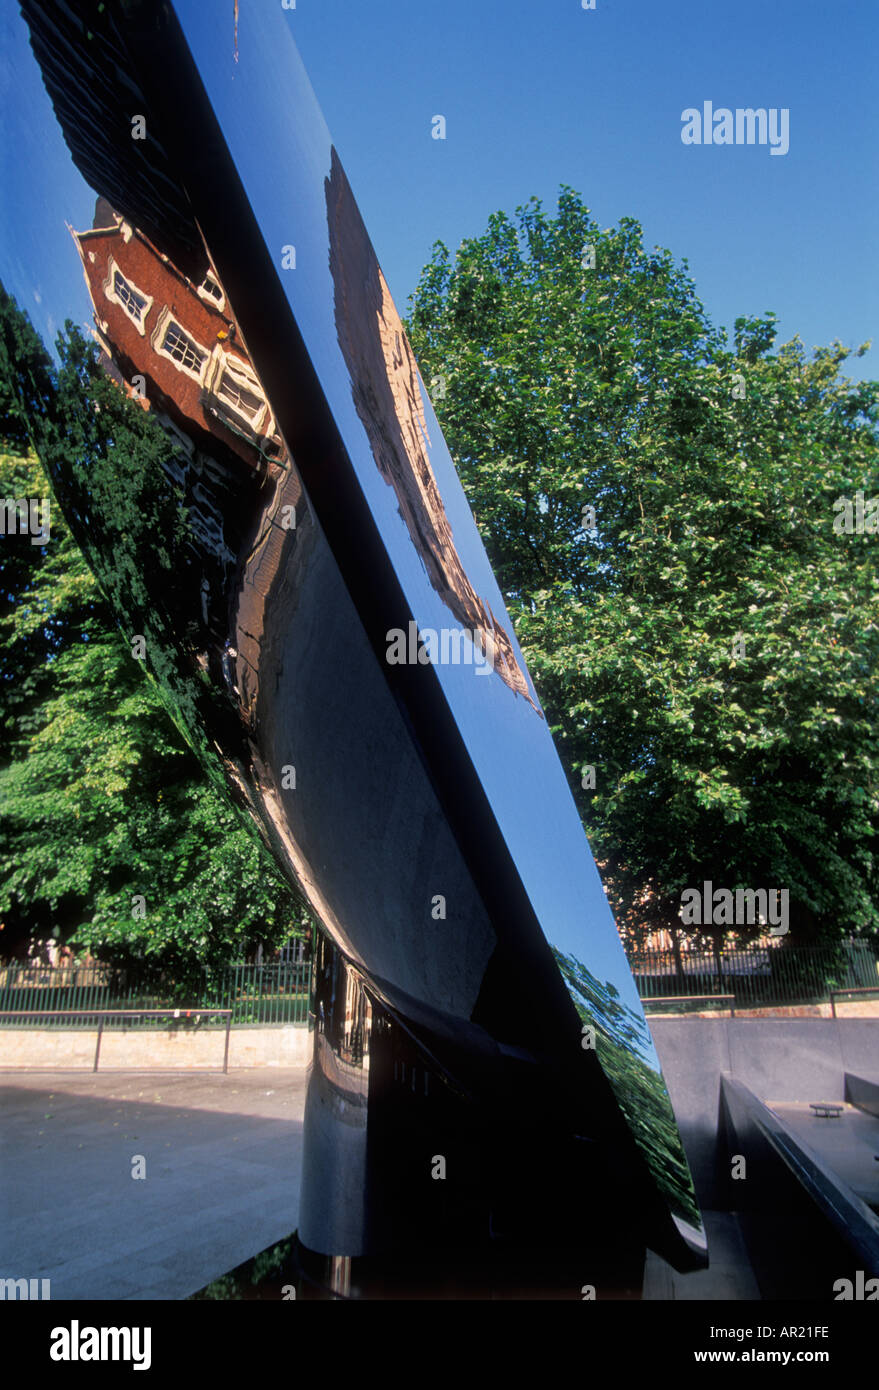 The stainless steel Sky Mirror outside the Nottingham Playhouse theatre Nottingham England GB UK EU Europe Stock Photo